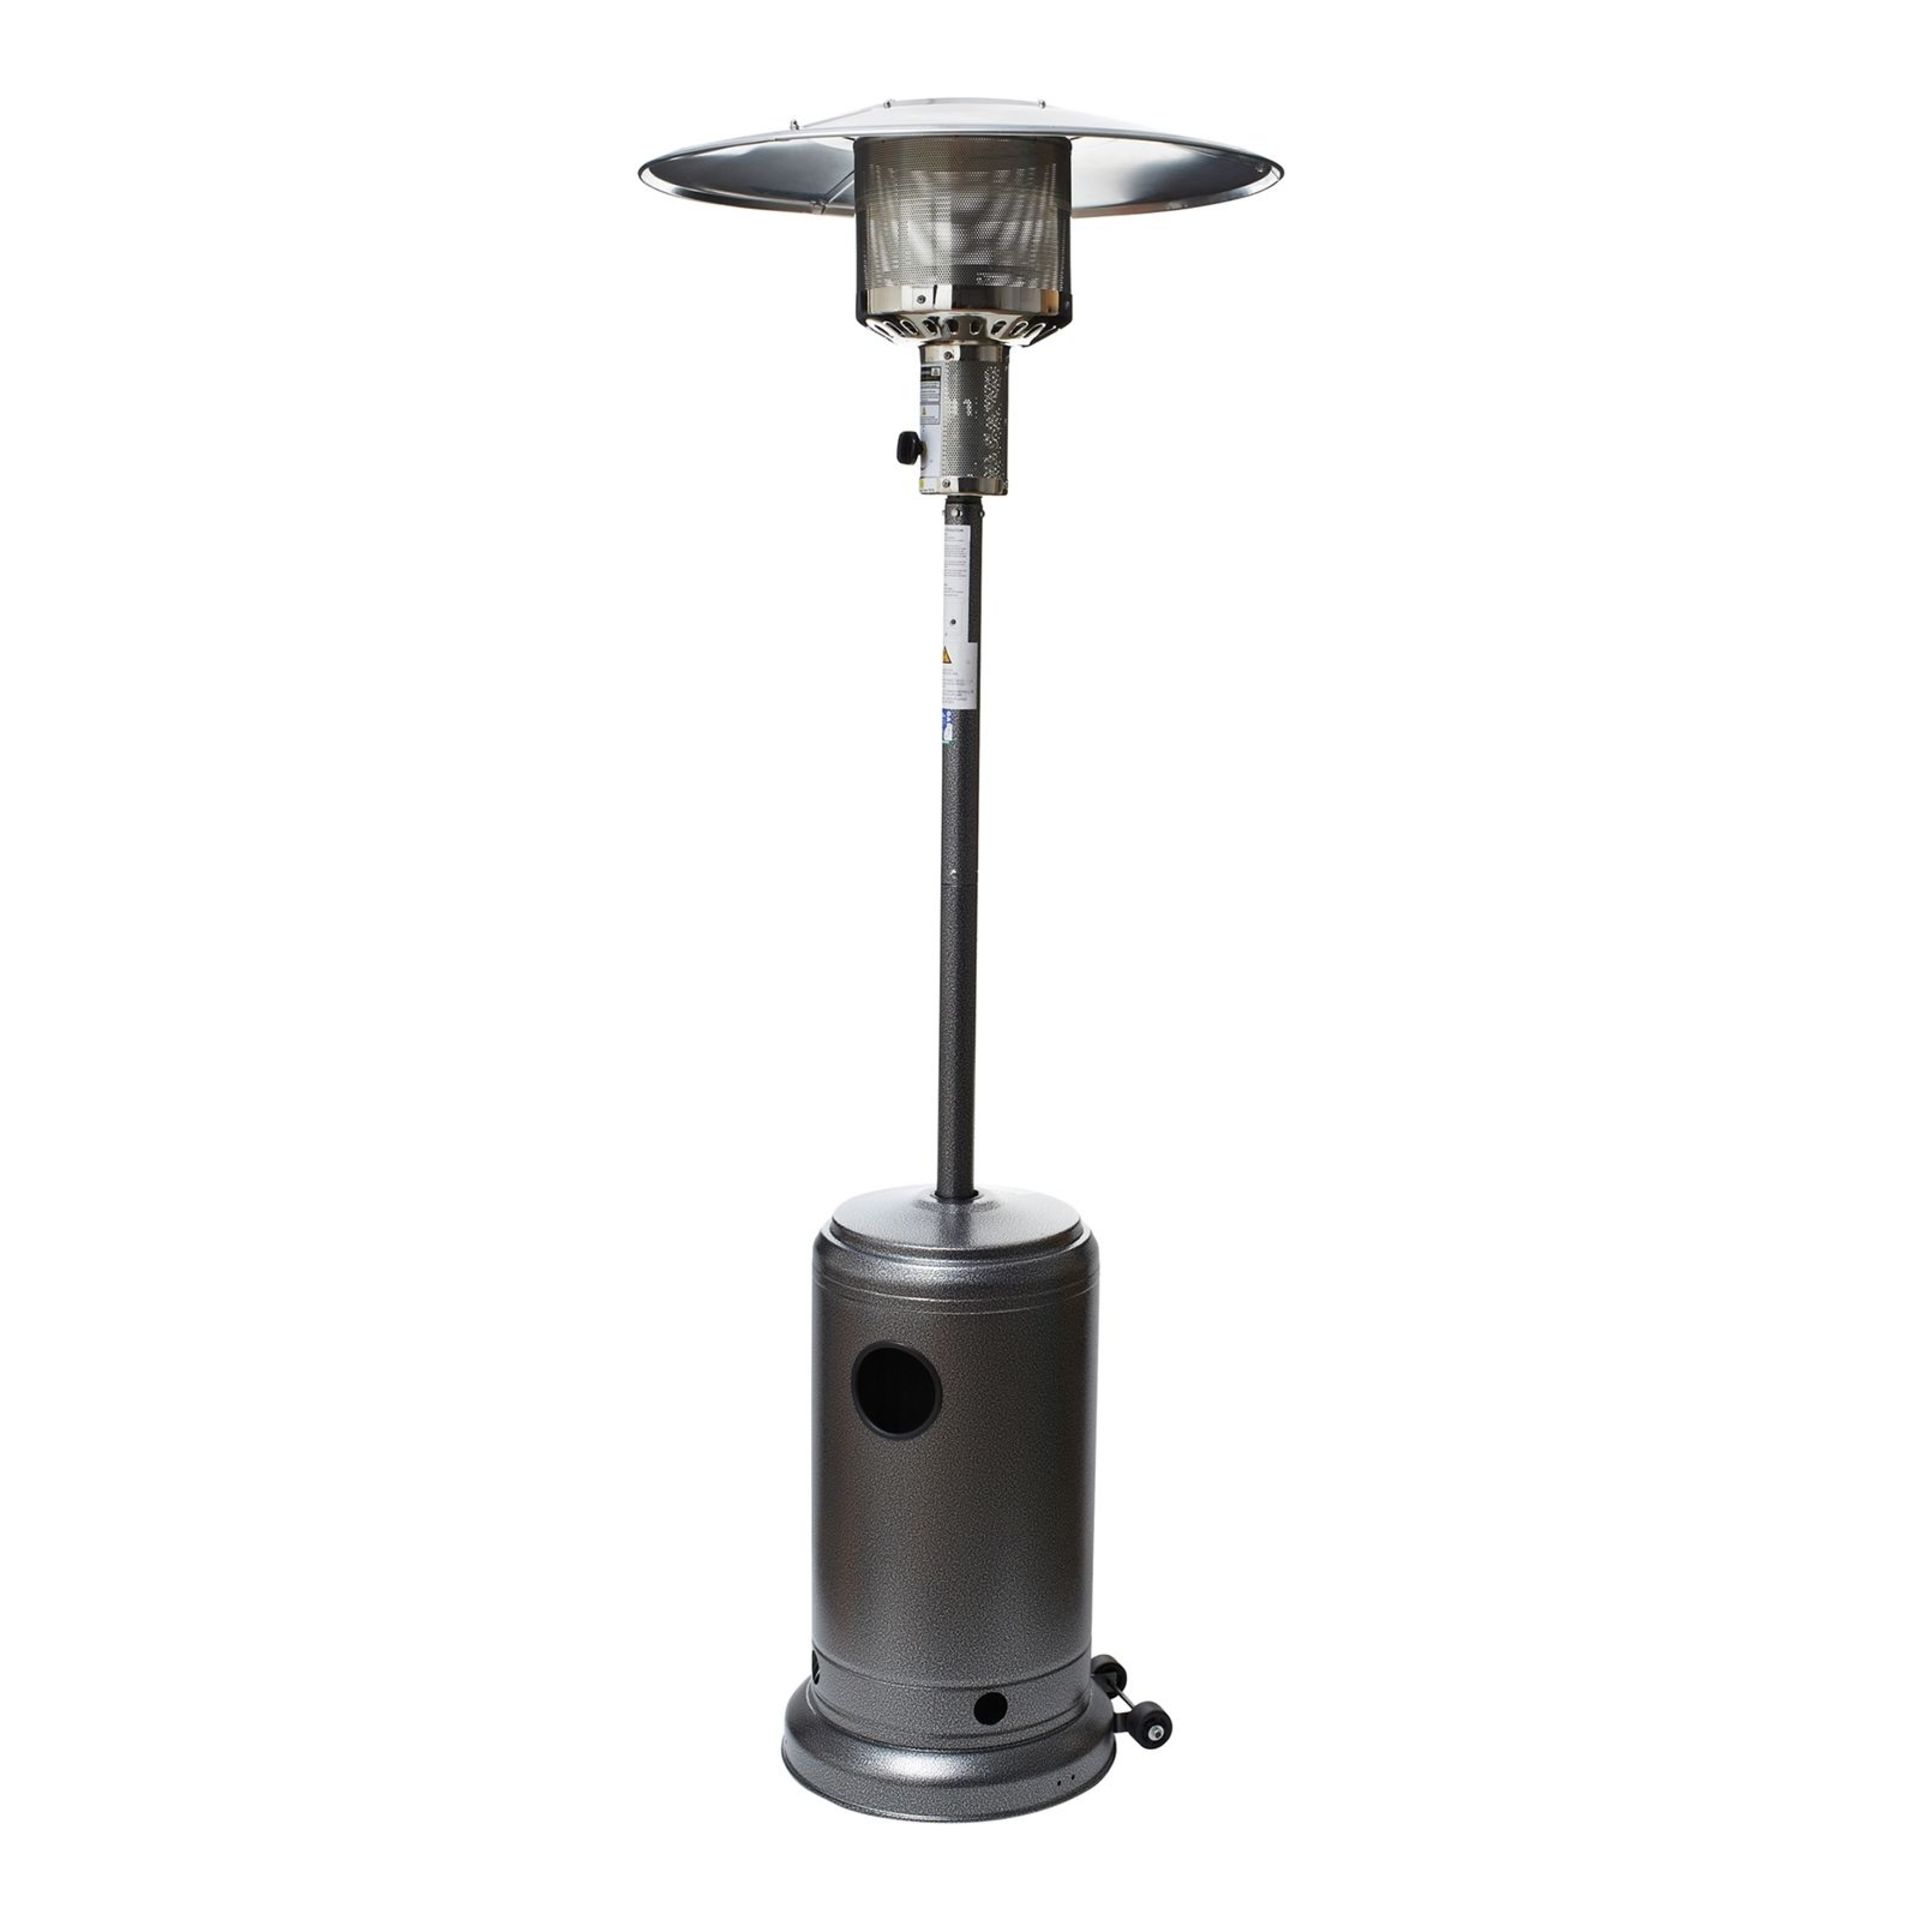 Brand New & Boxed Outdoor Patio Heater in Silver.